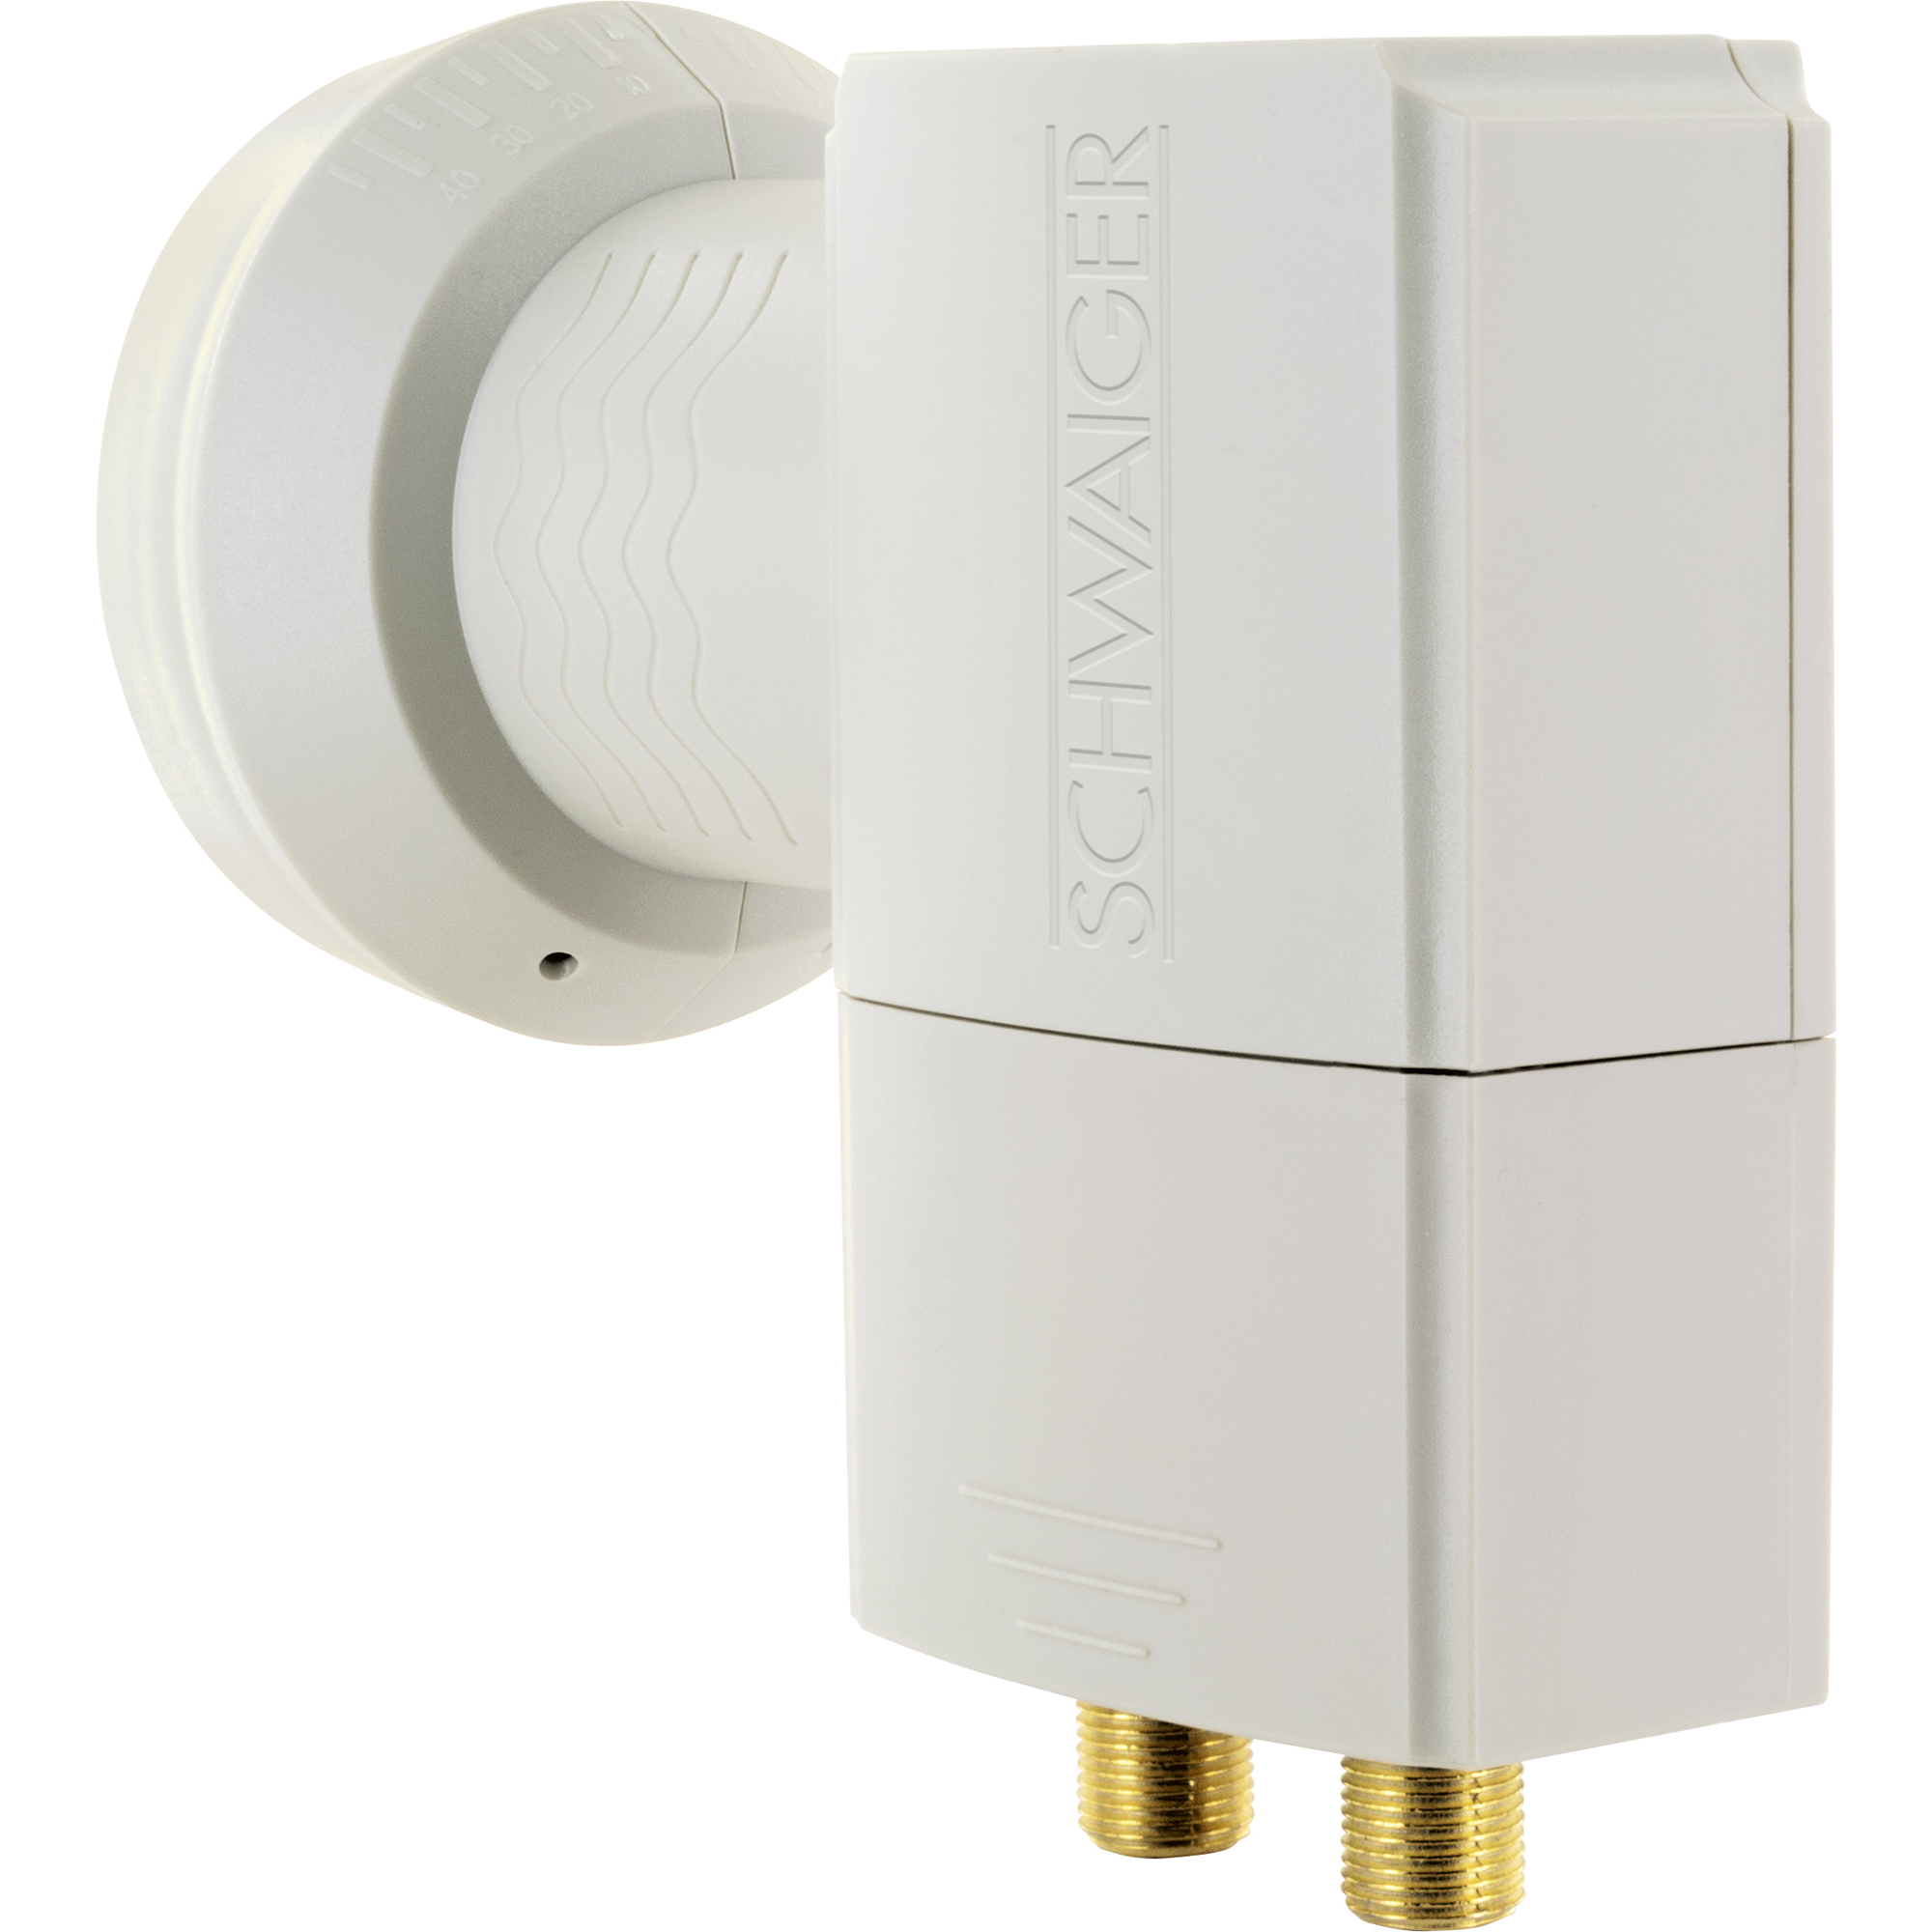 Digitales Twin LNB 'Sun Protect' hellgrau + product picture